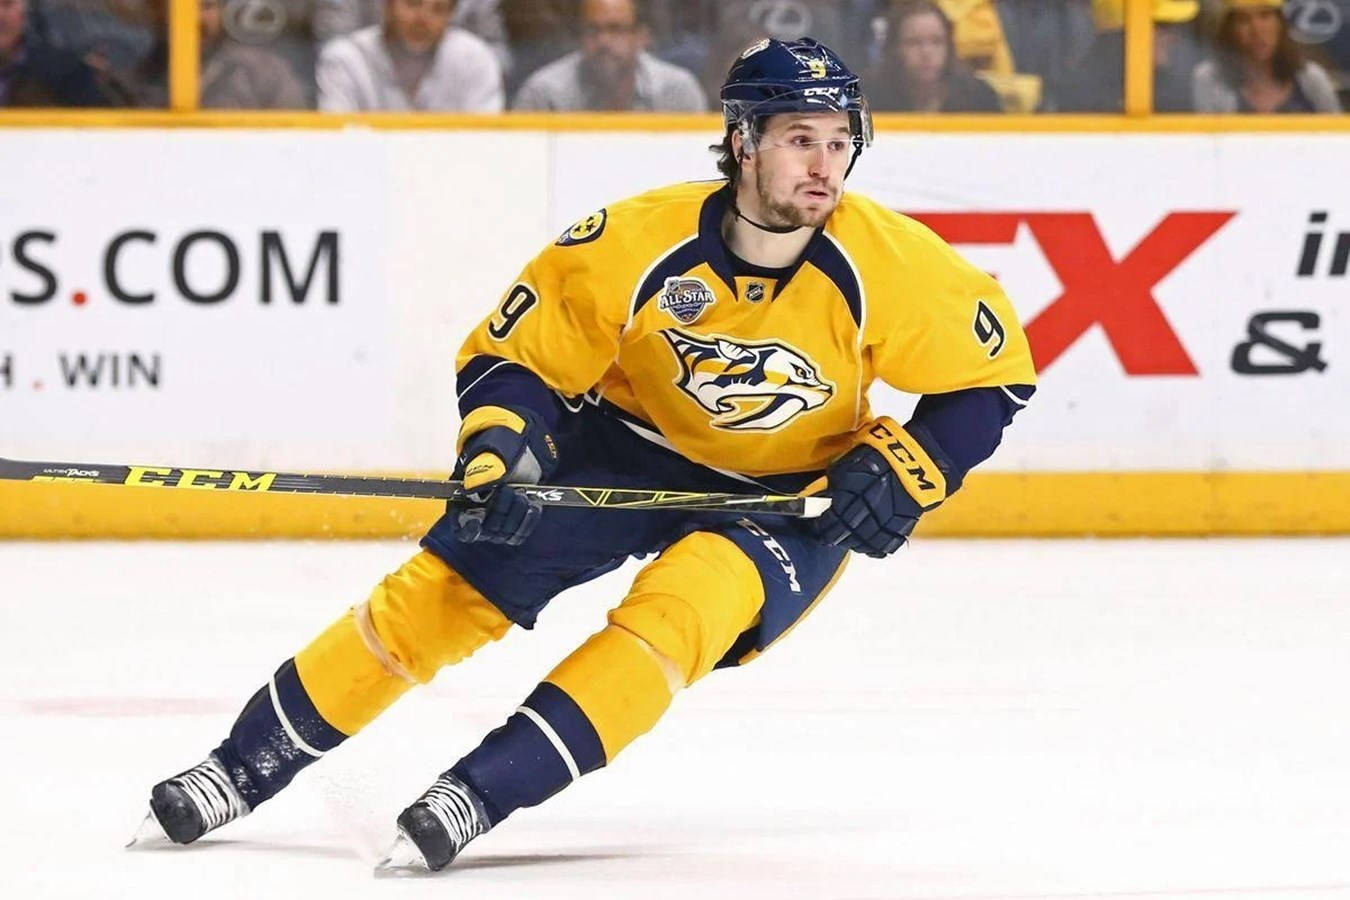 NHL -- The Nashville Predators' Filip Forsberg is a true star, but the  prolific forward credits his generous linemates and 'friendly' fans for  team's success - ESPN